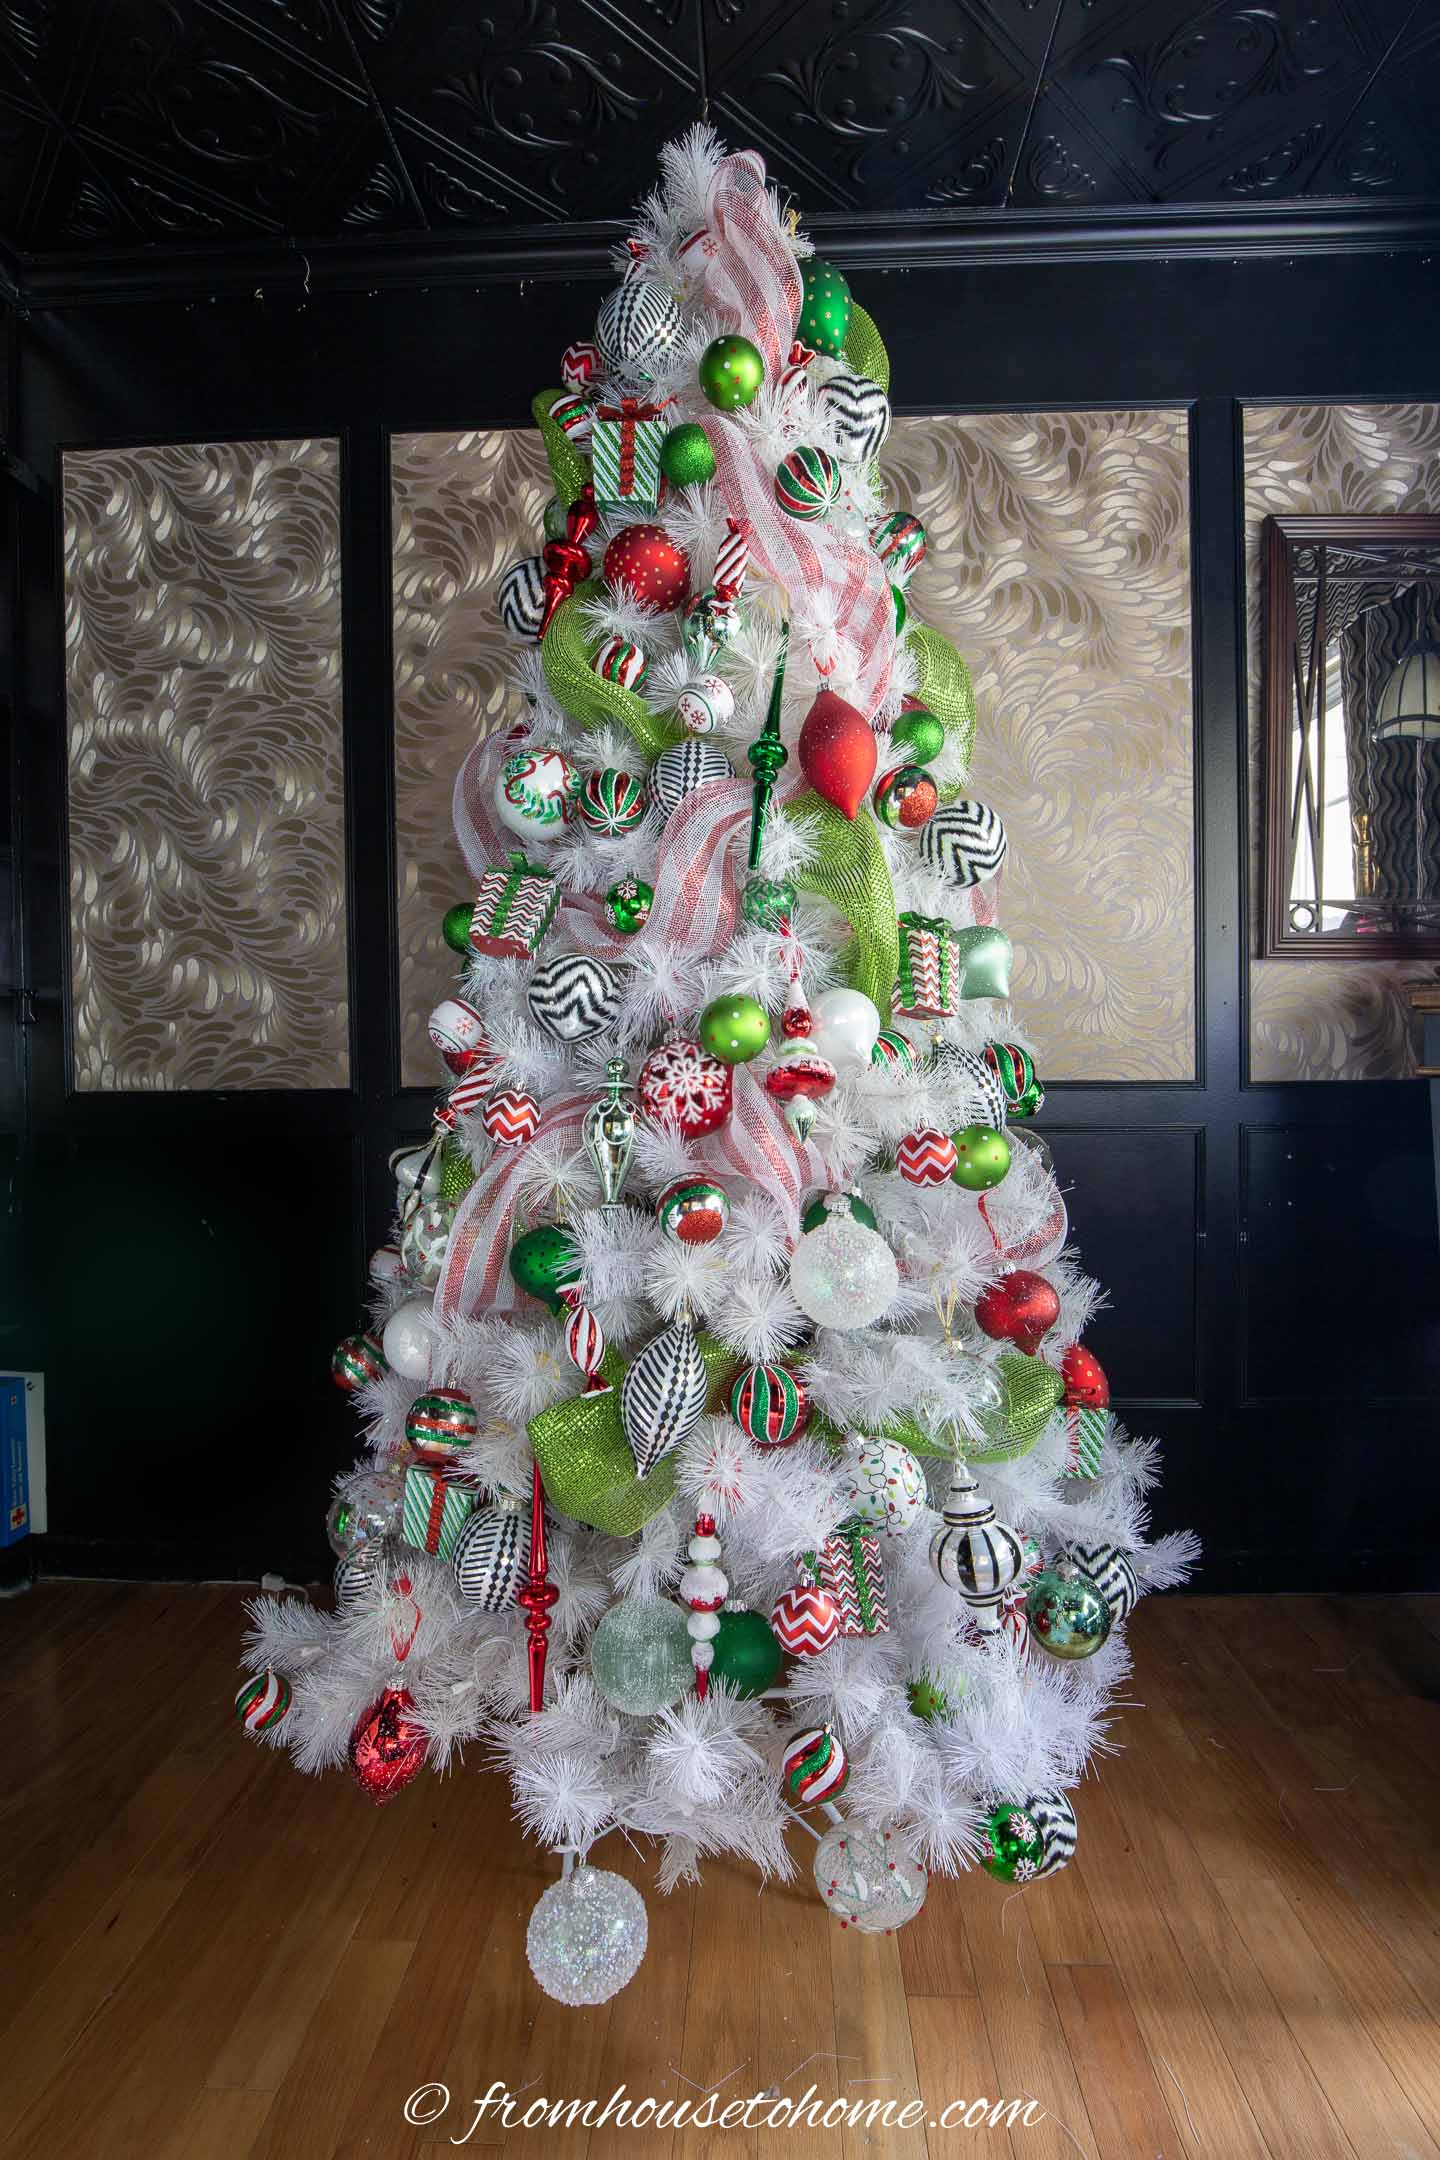 White Christmas tree with small and large green and red ornaments on it